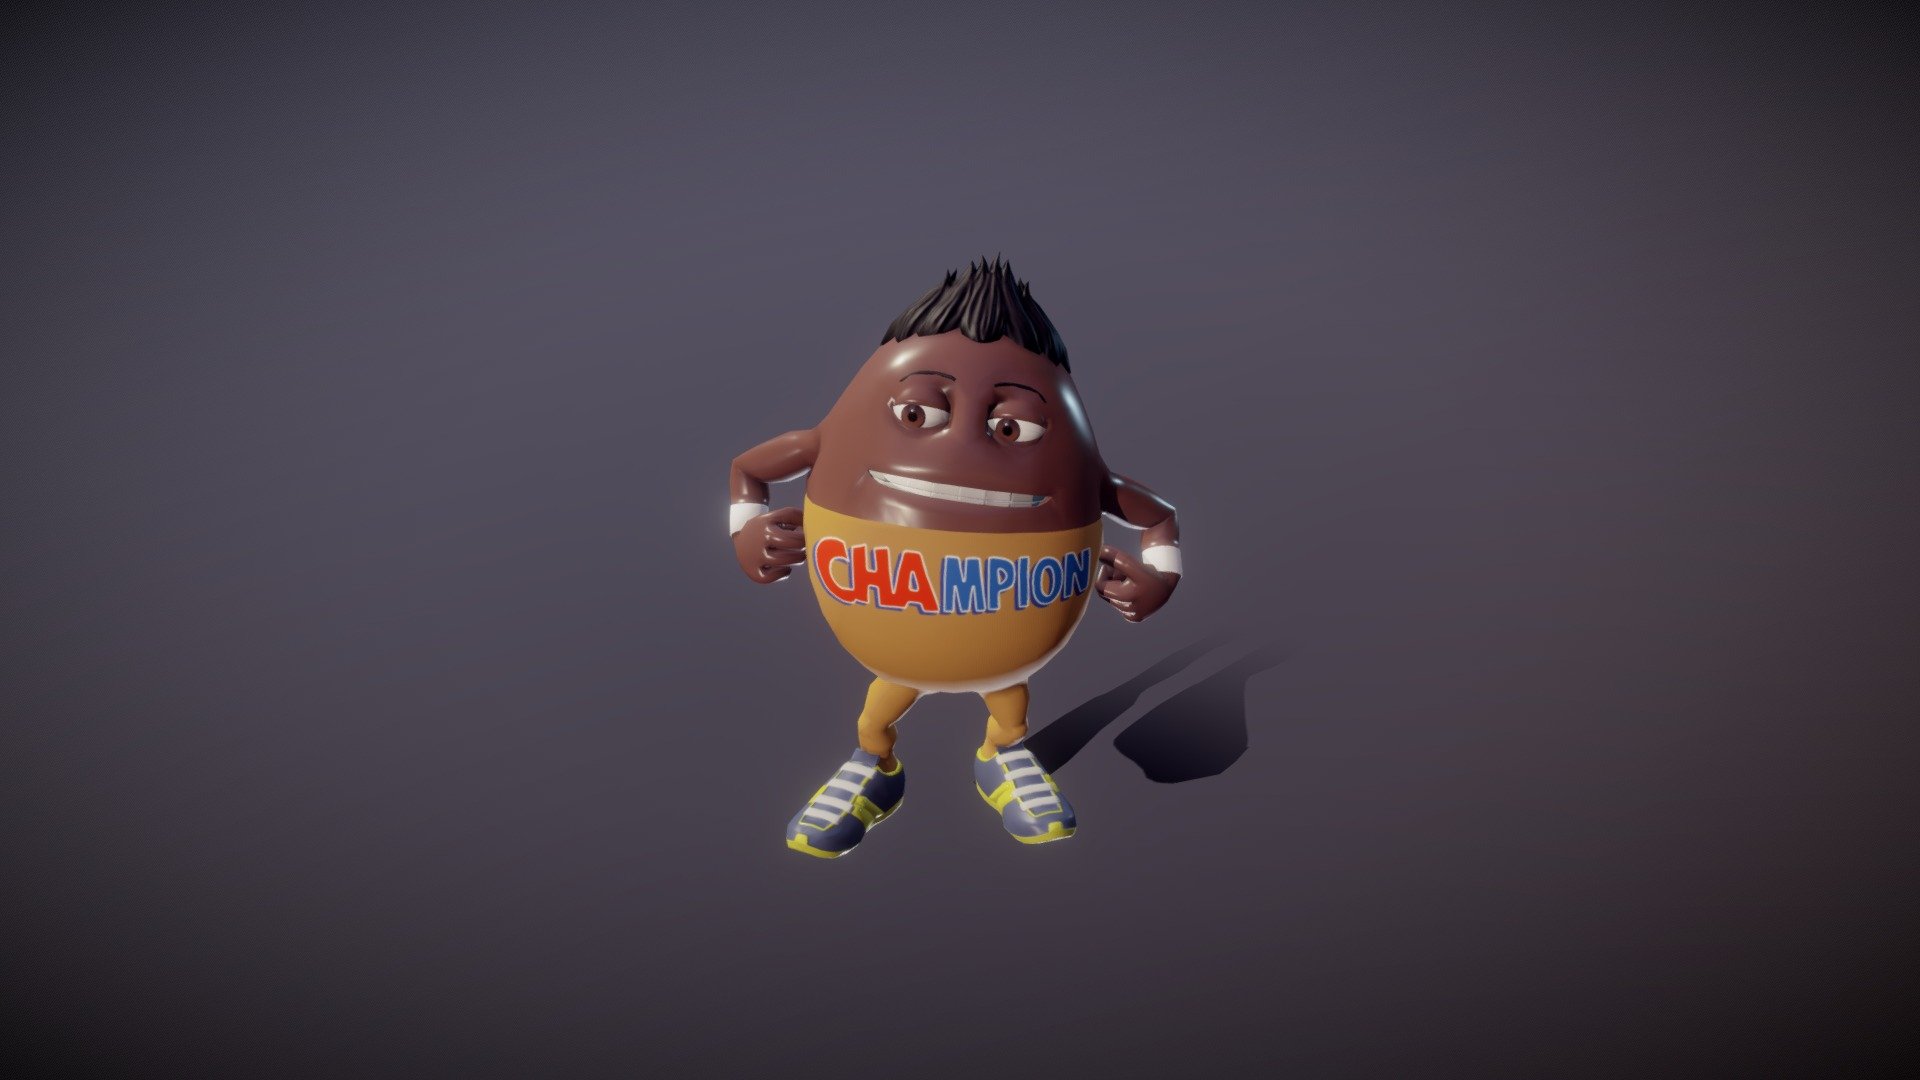 A character I made for mobile game based on a food product commercial. Unfortunately, the project was cancelled. Modelled and uv unwrapped in Maya. Texture done in Substance Painter. Rigged in Blender. 
Poly count: 4237 faces, 8202 tris 3d model